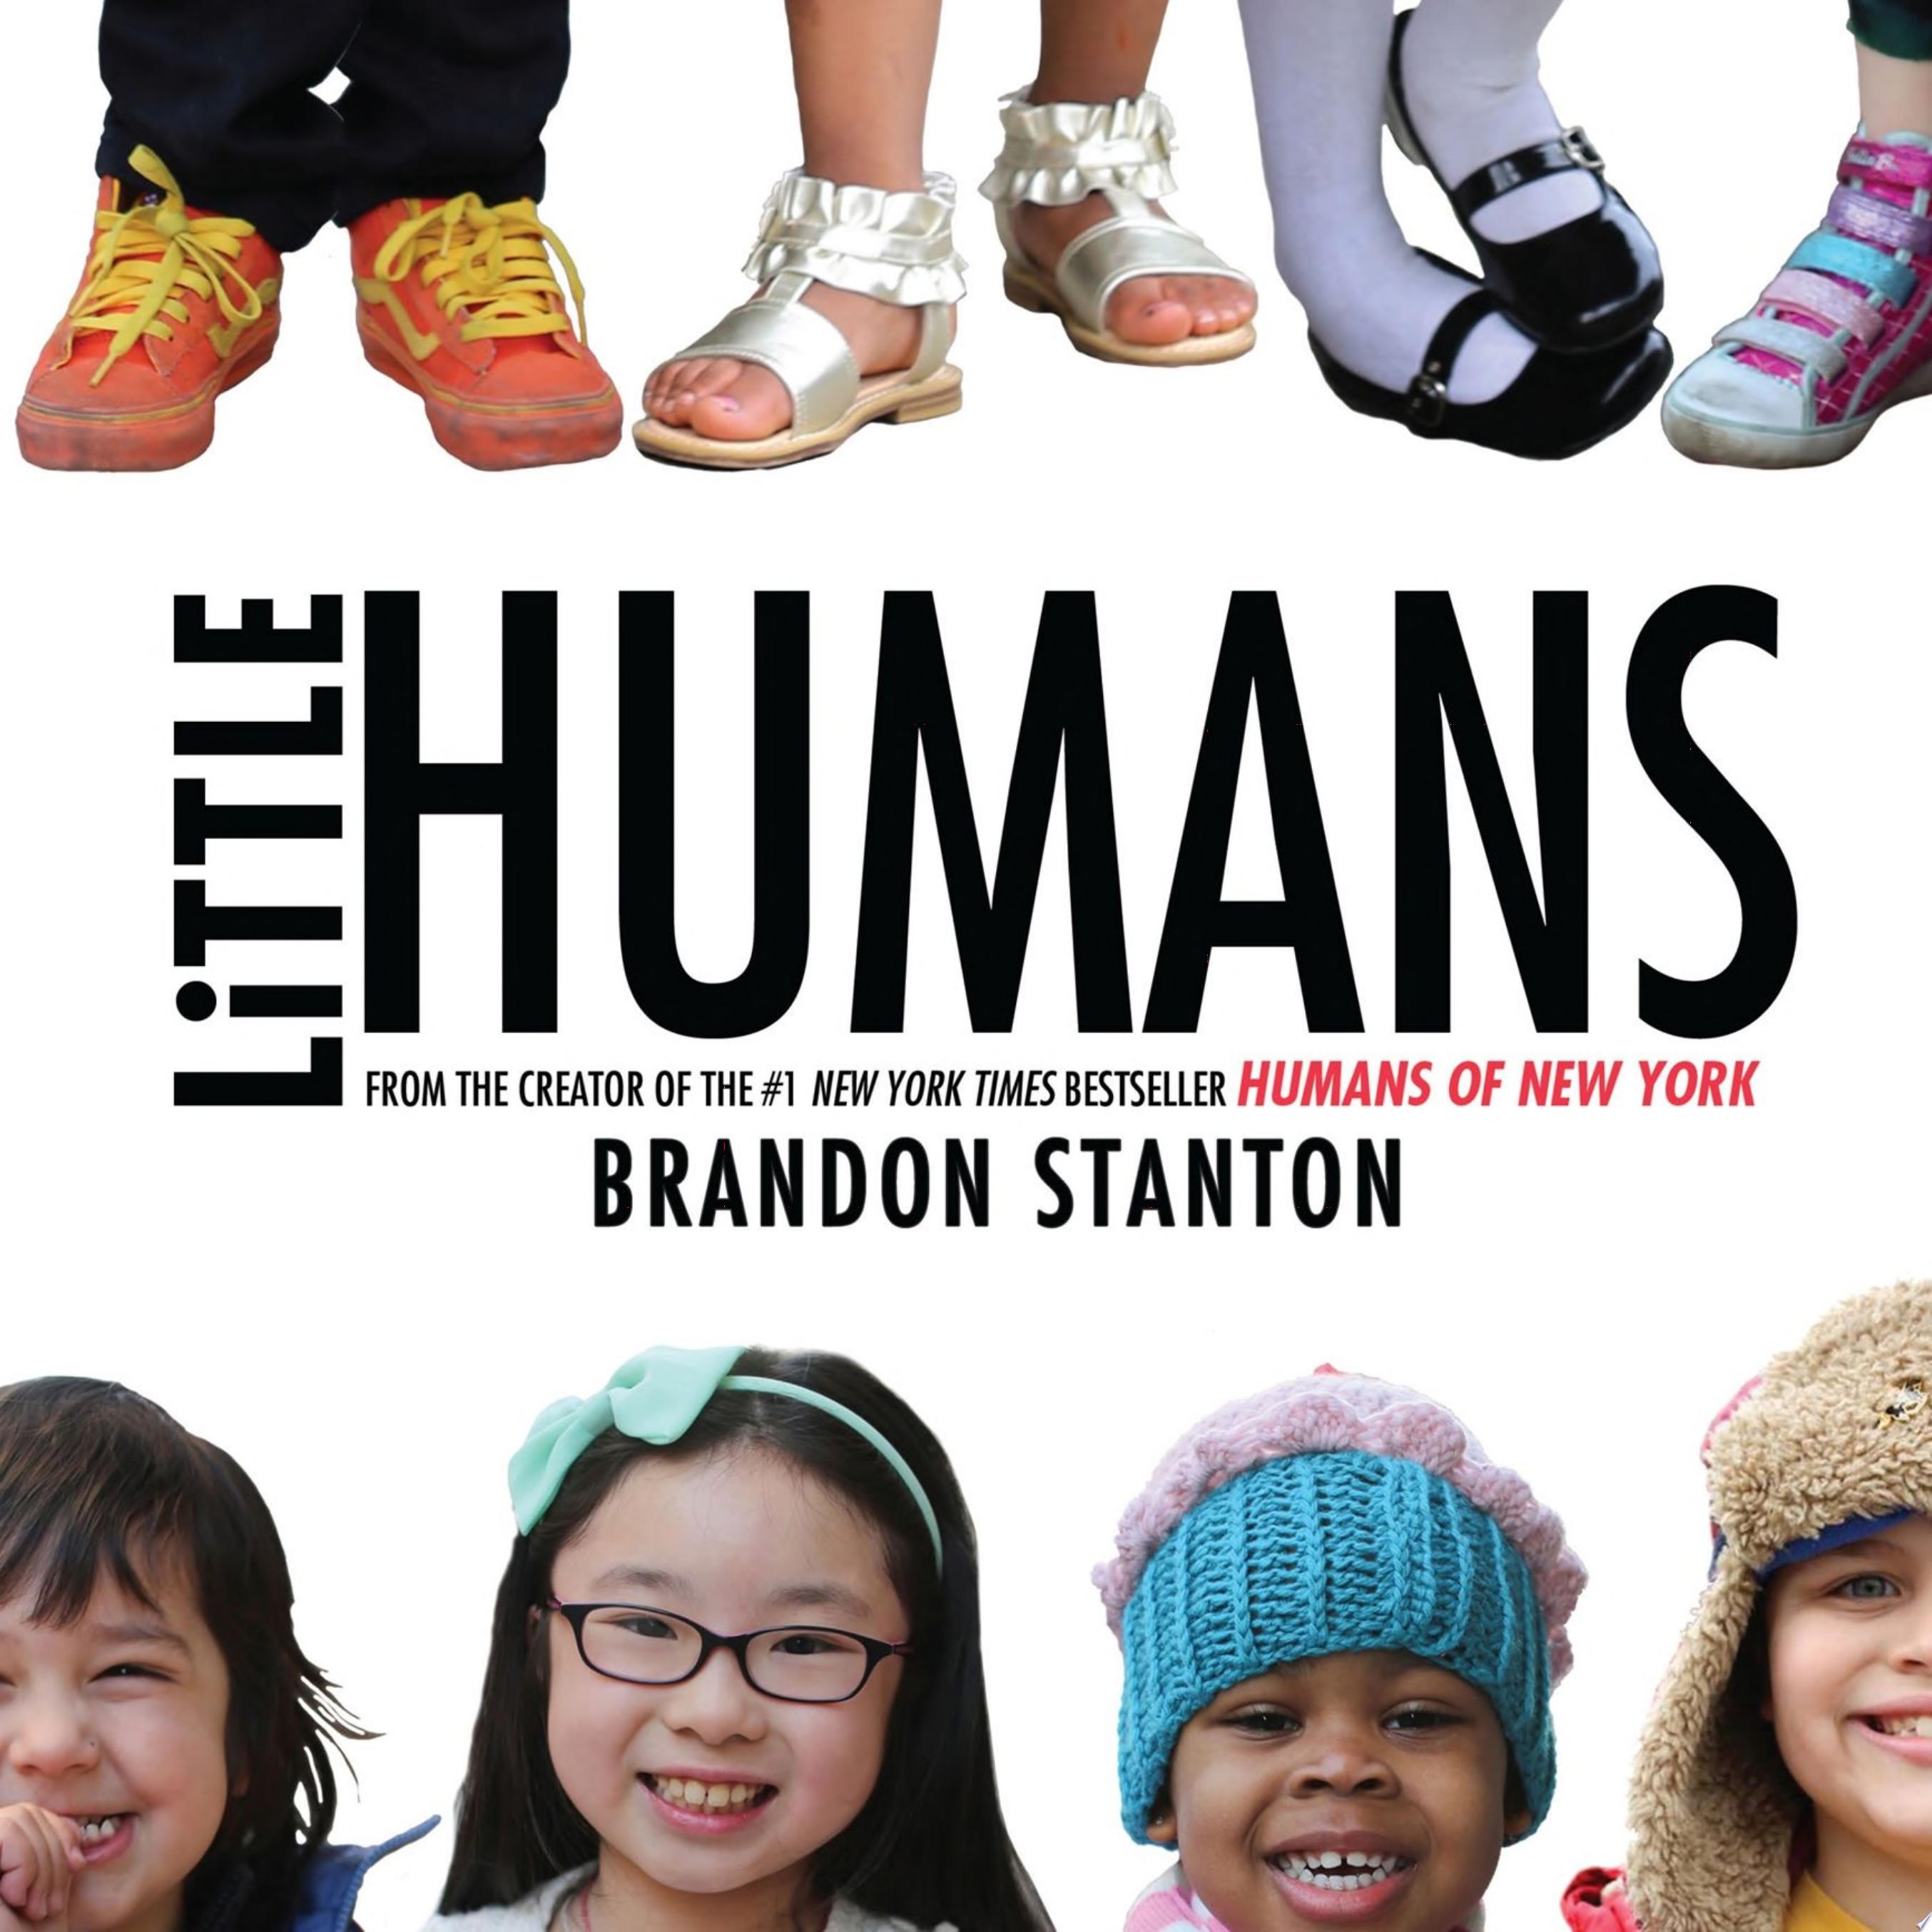 Image for "Little Humans"